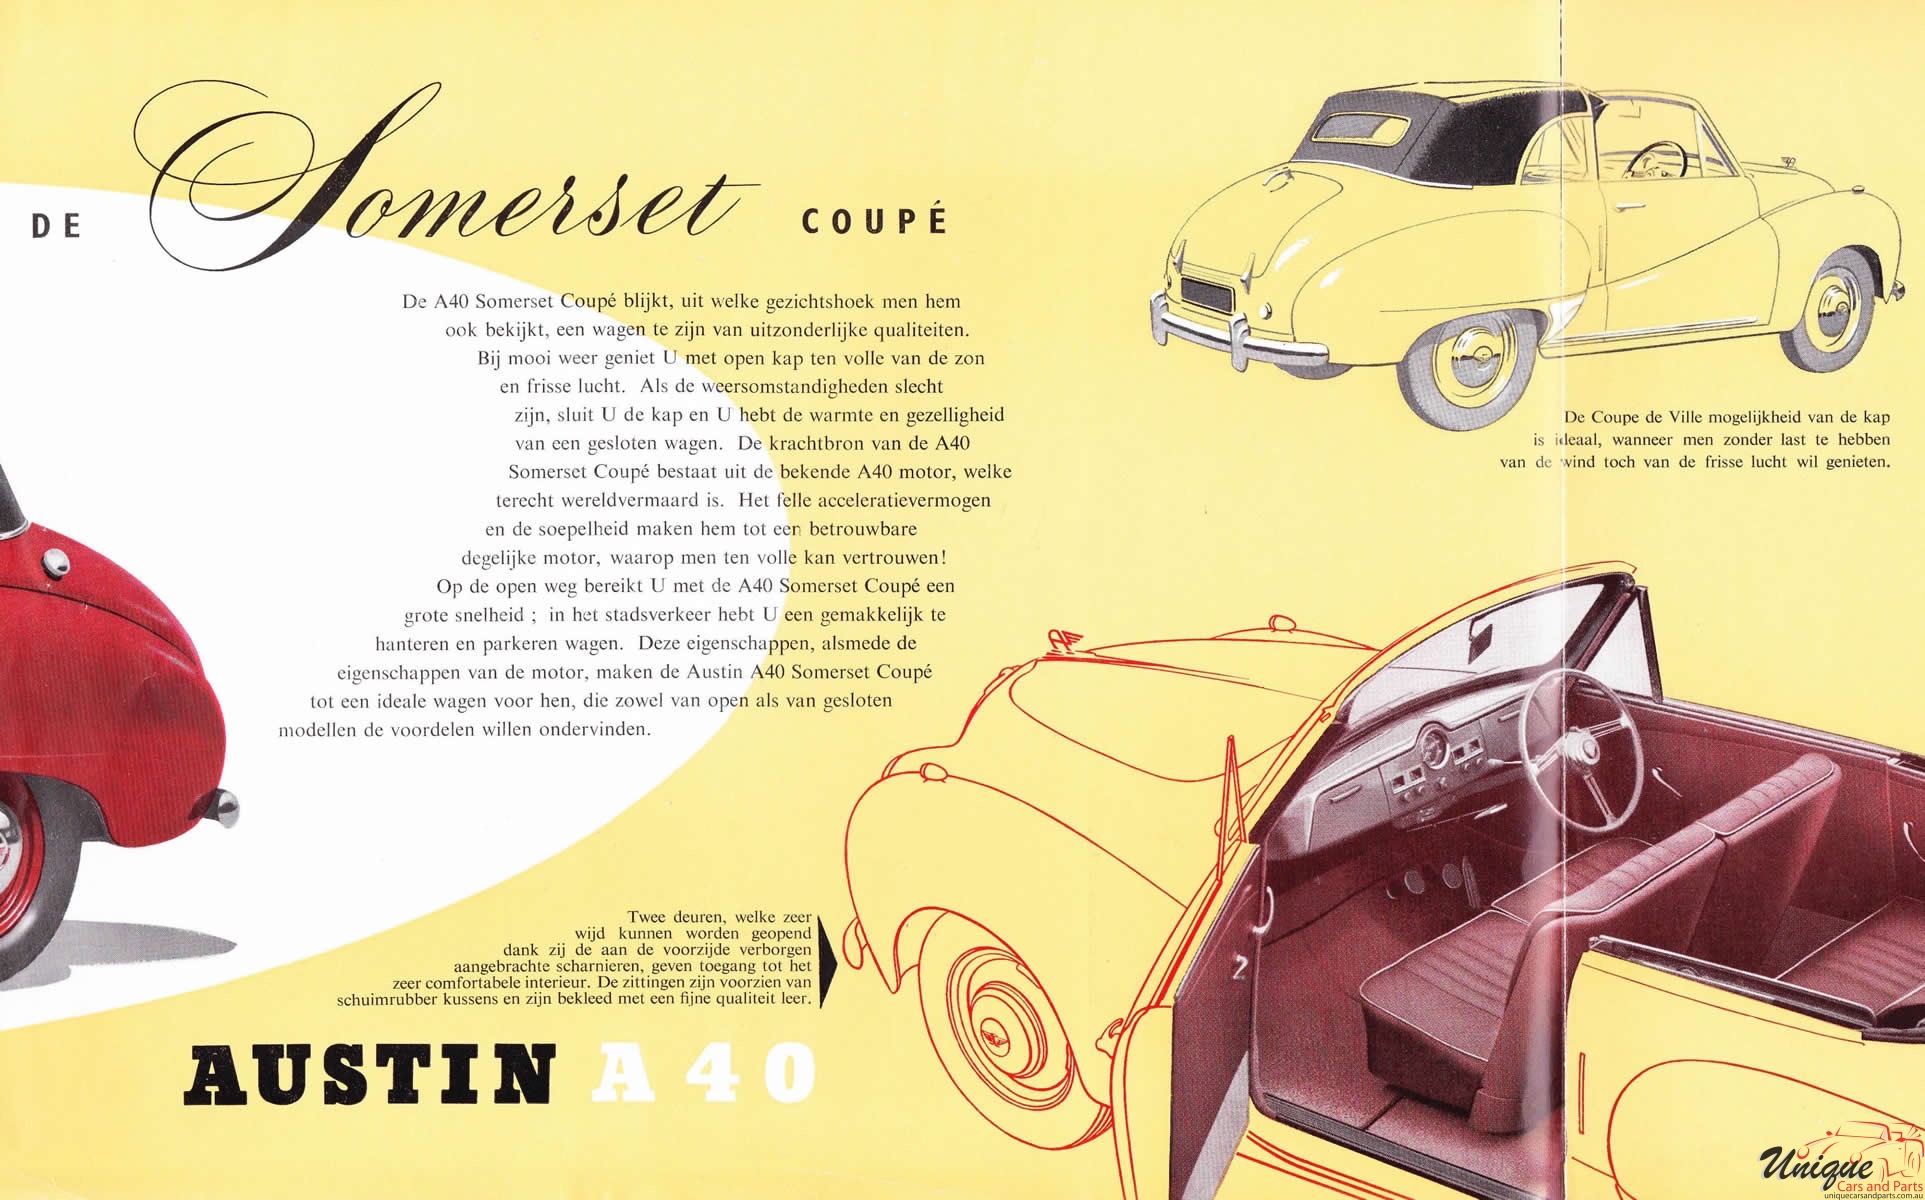 1950 Austin A40 Somerset Coupe Brochure Page 4